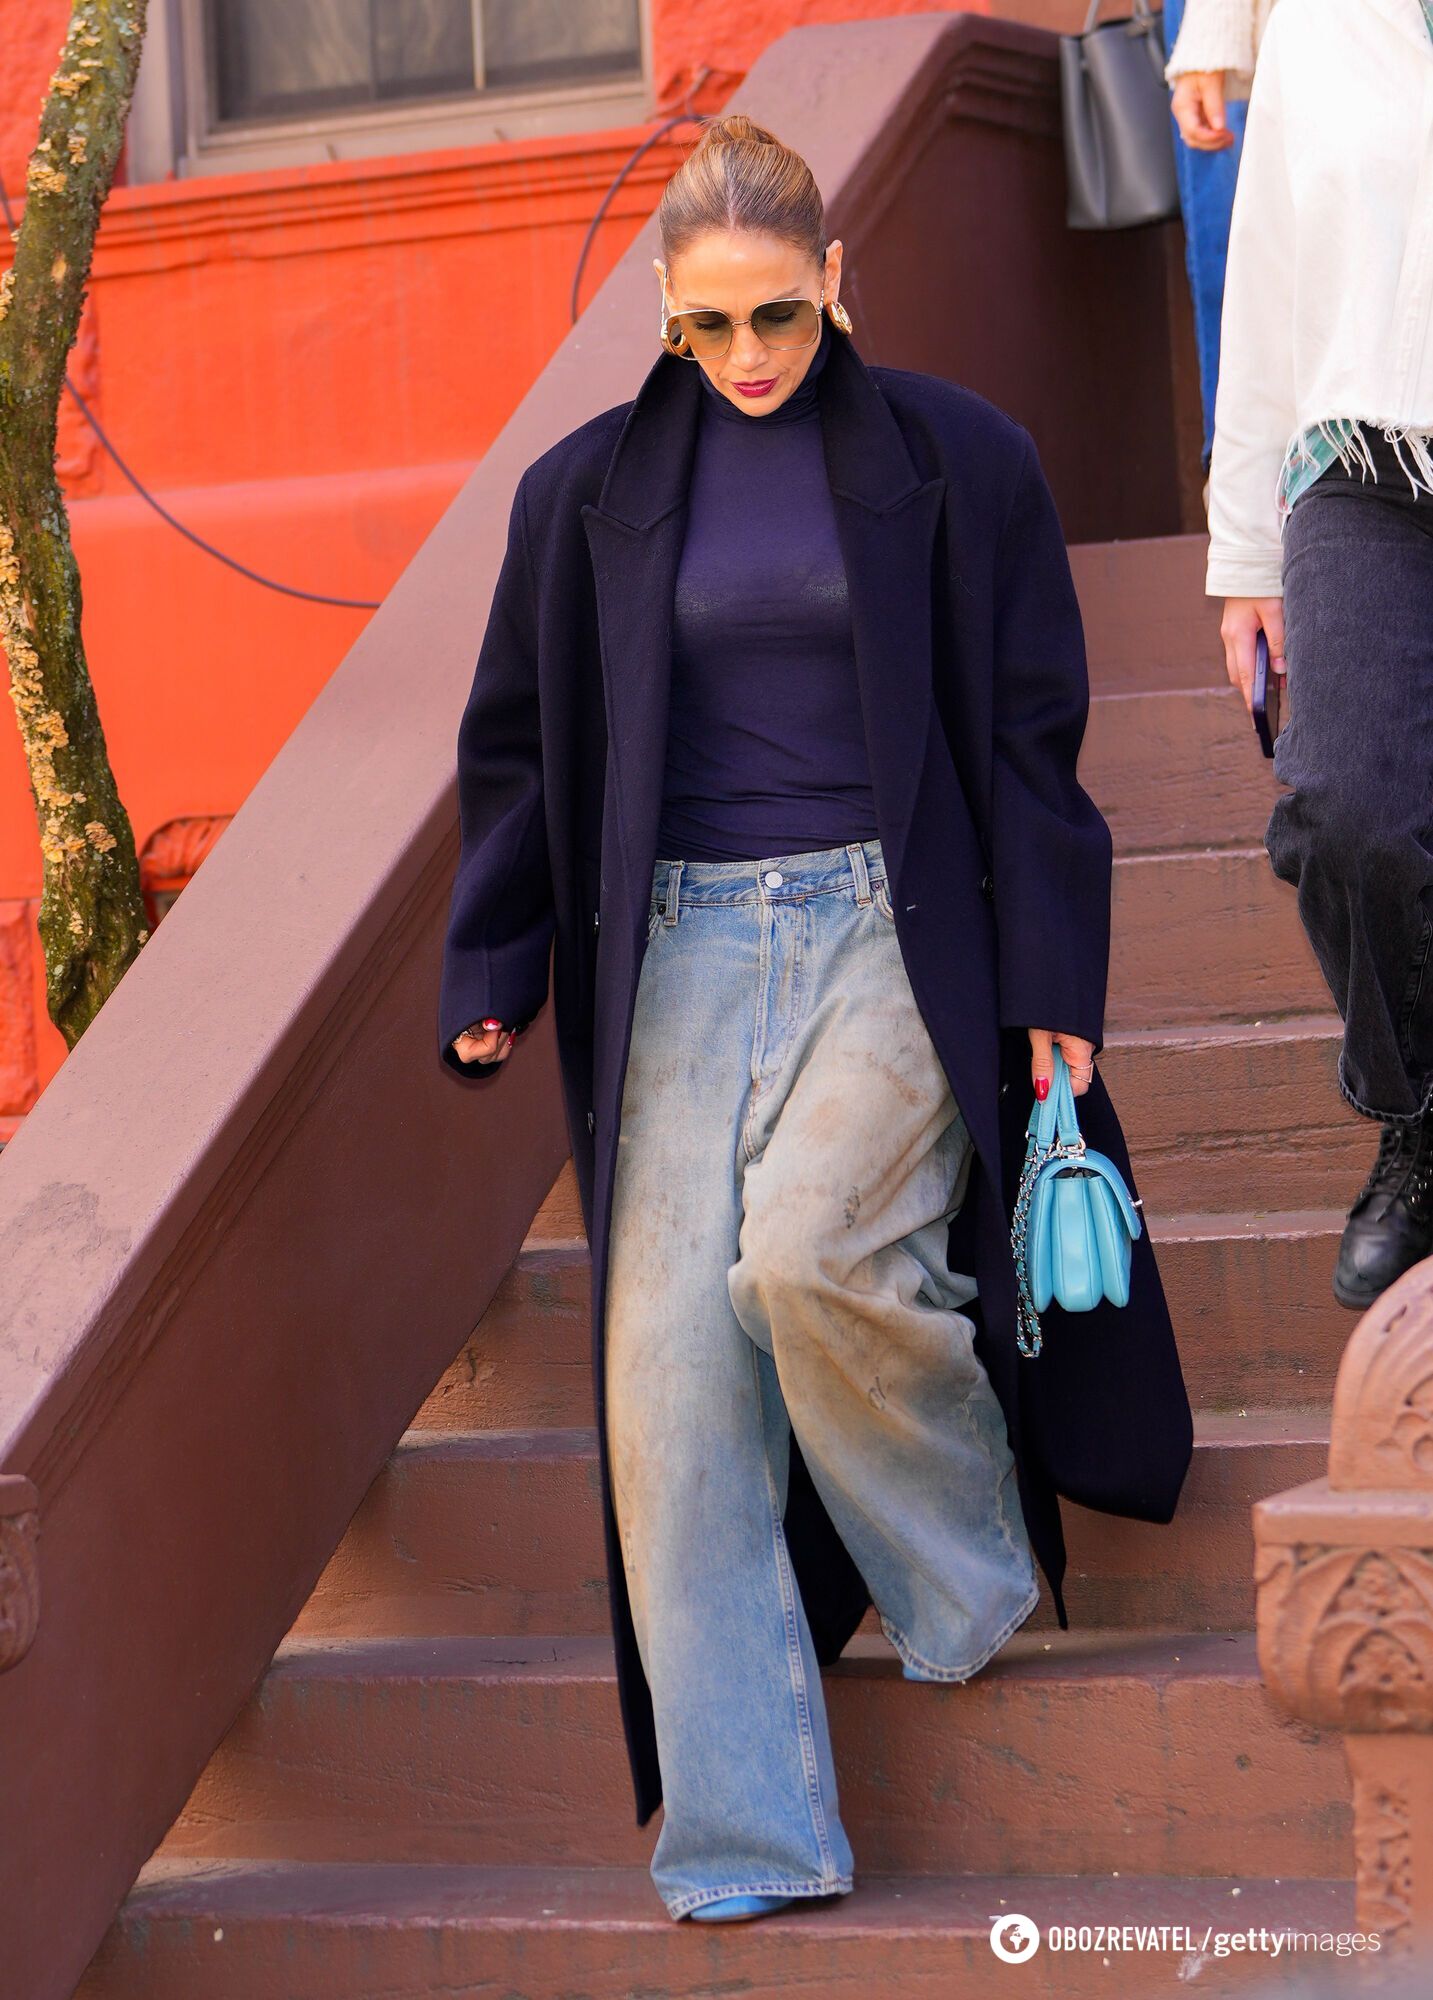 Jennifer Lopez joins the ''dirty denim'' trend of the 90s, showing off popular jeans